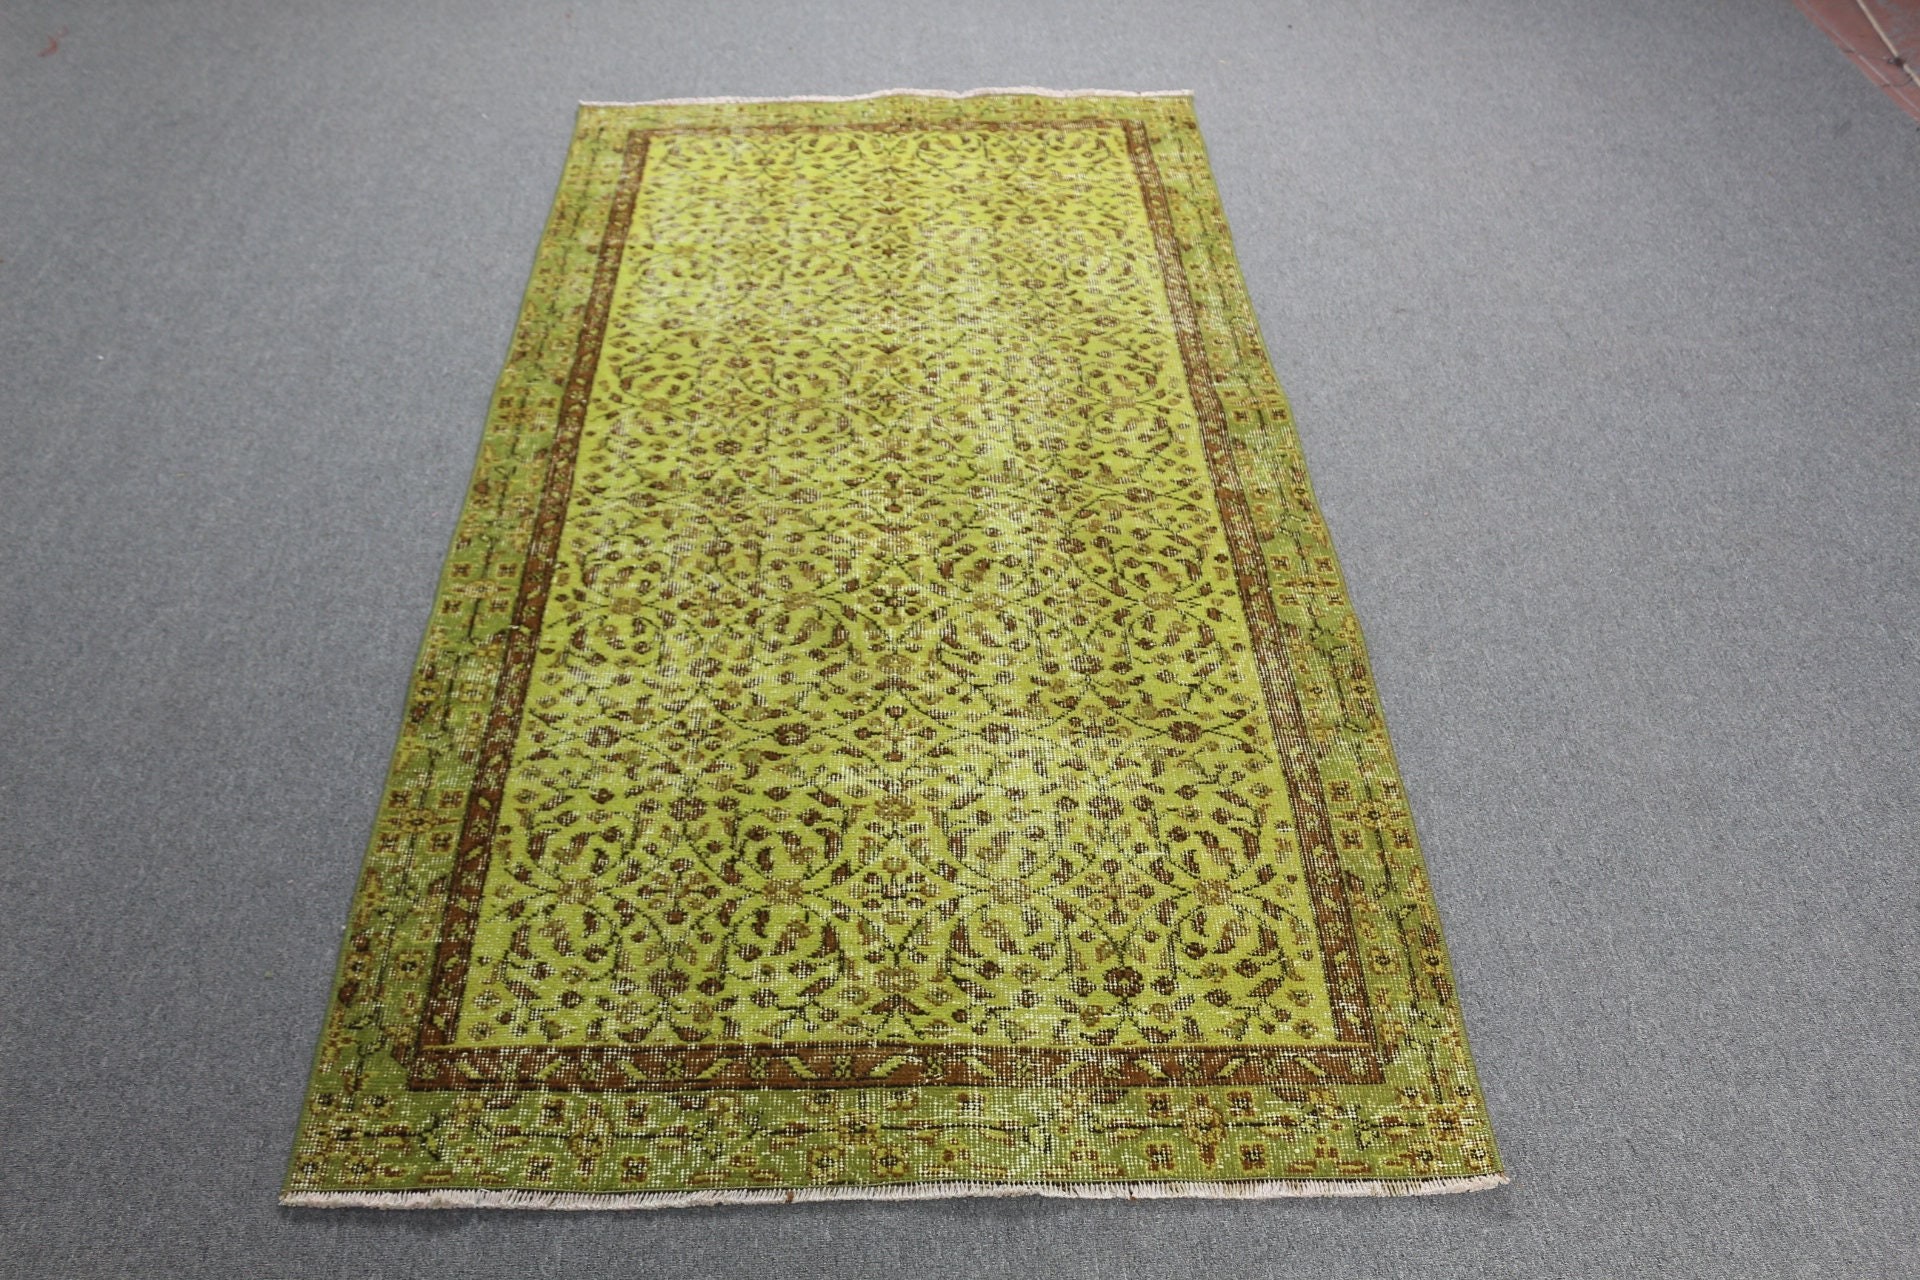 Vintage Rugs, Turkish Rug, Green Antique Rug, Rugs for Bedroom, Kitchen Rug, 3.5x6.7 ft Accent Rugs, Bright Rug, Anatolian Rug, Bedroom Rug